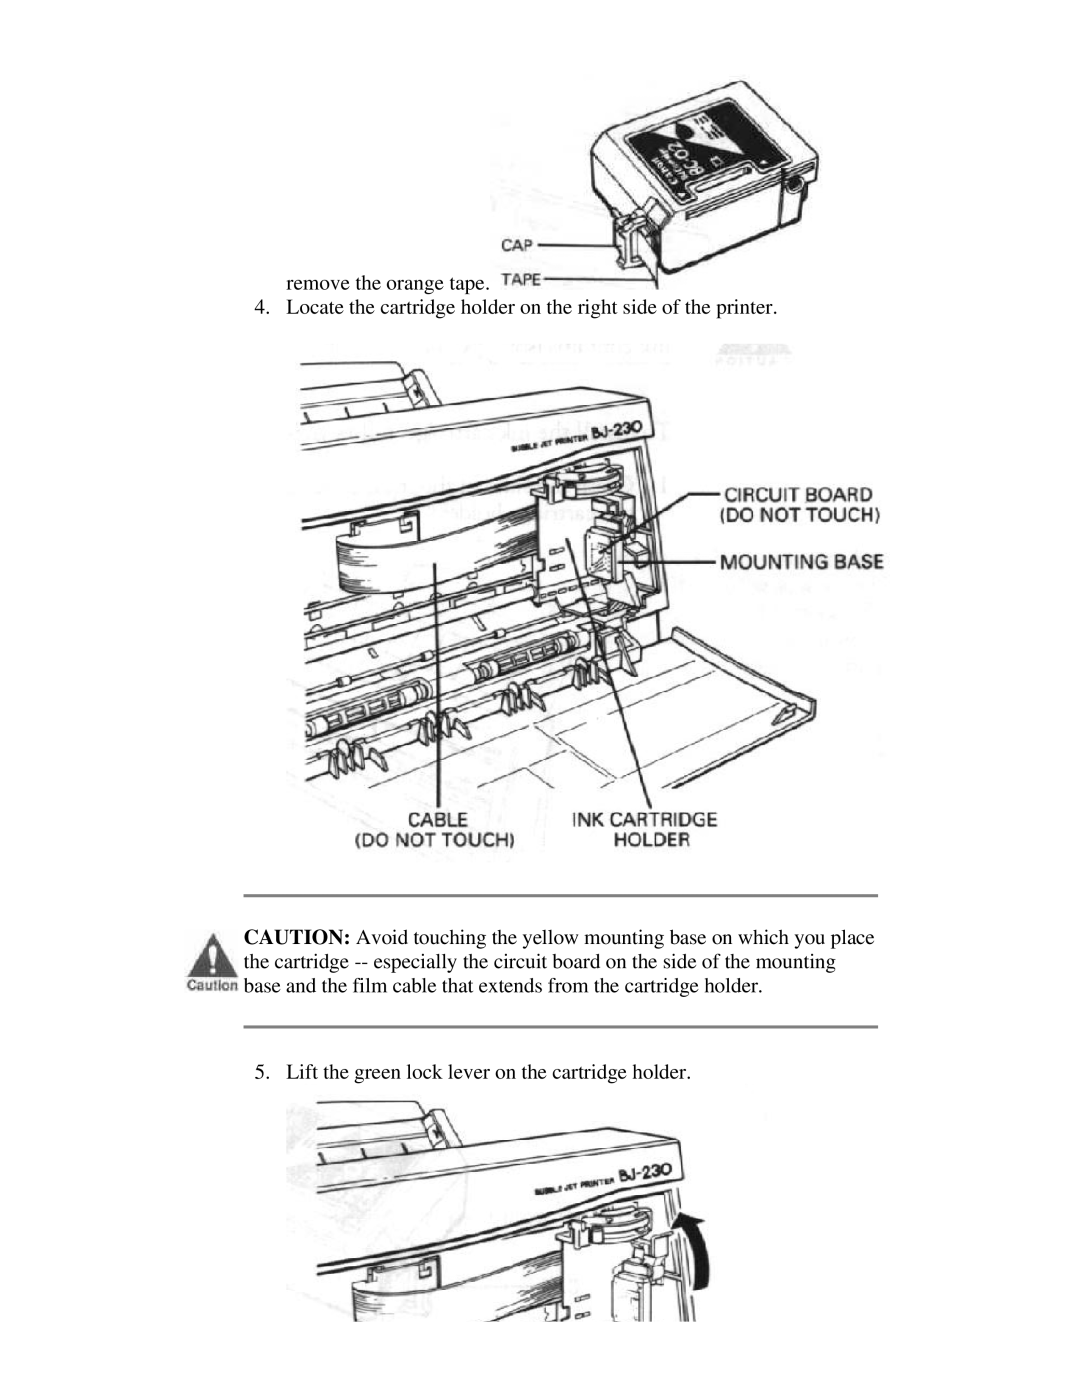 Canon BJ-230 user manual Lift the green lock lever on the cartridge holder 